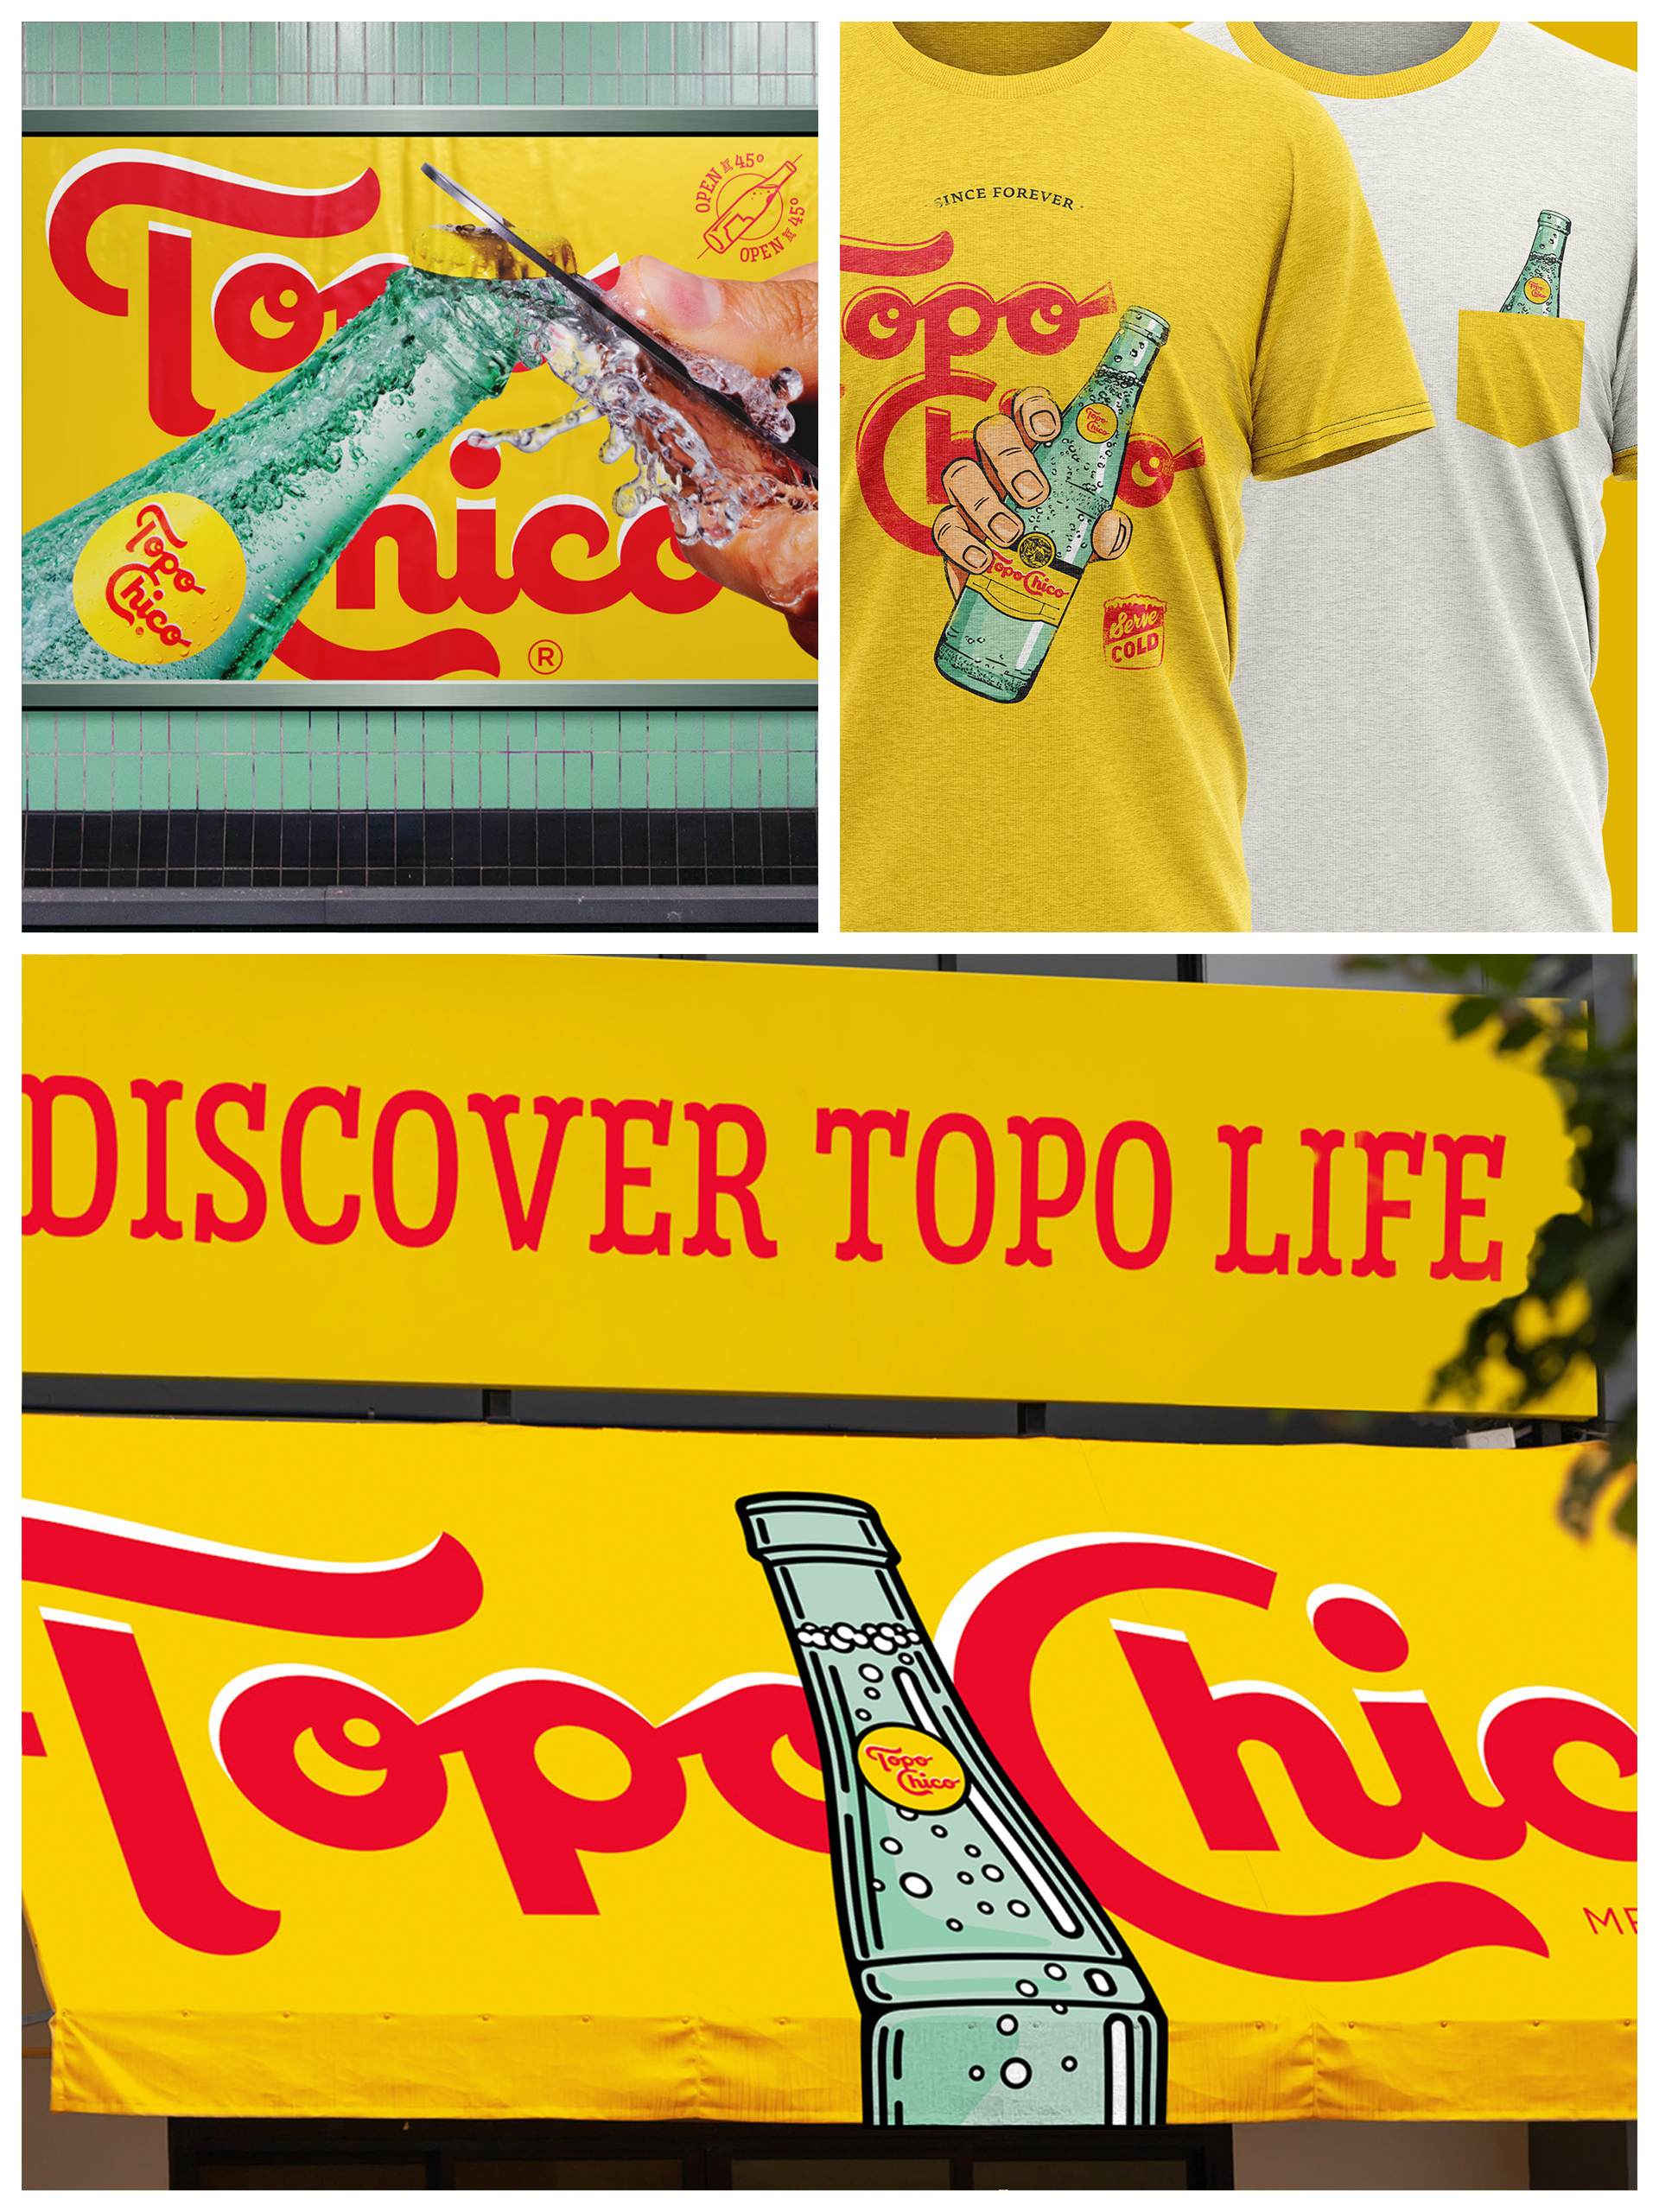 Topo Chico: Source of Discovery